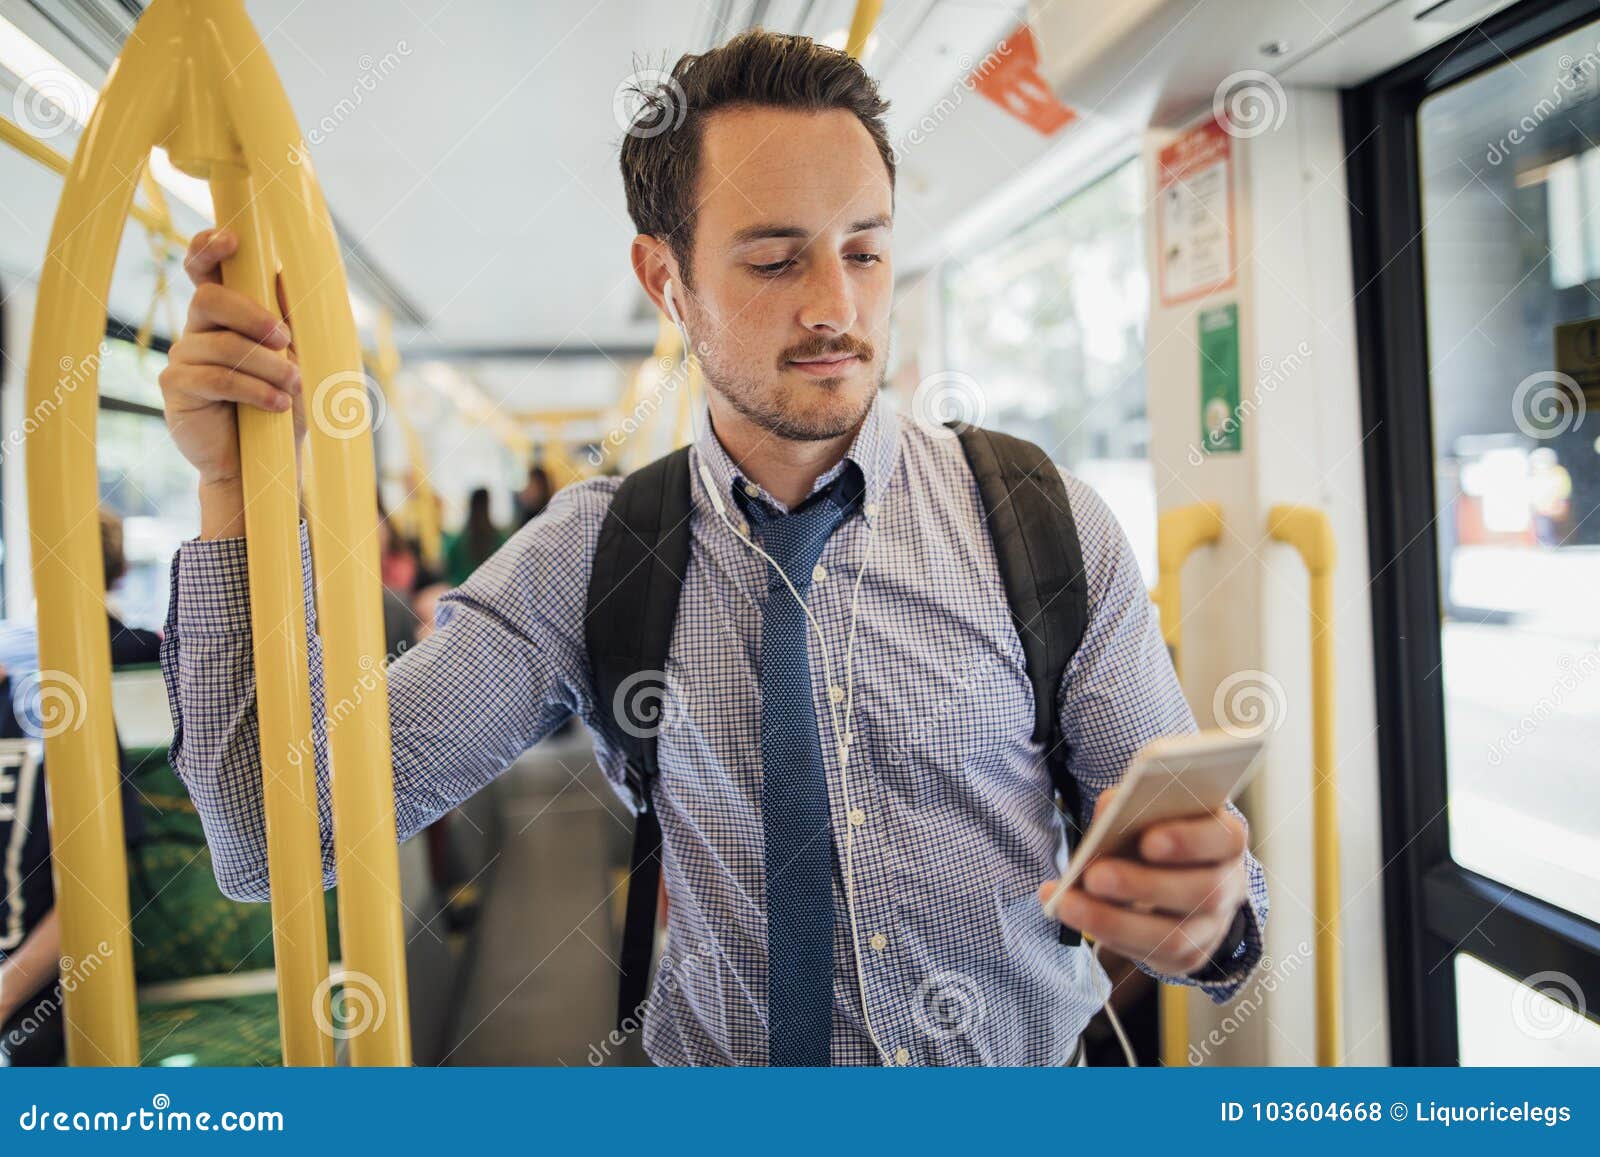 businessman commuting by tram in melbourne